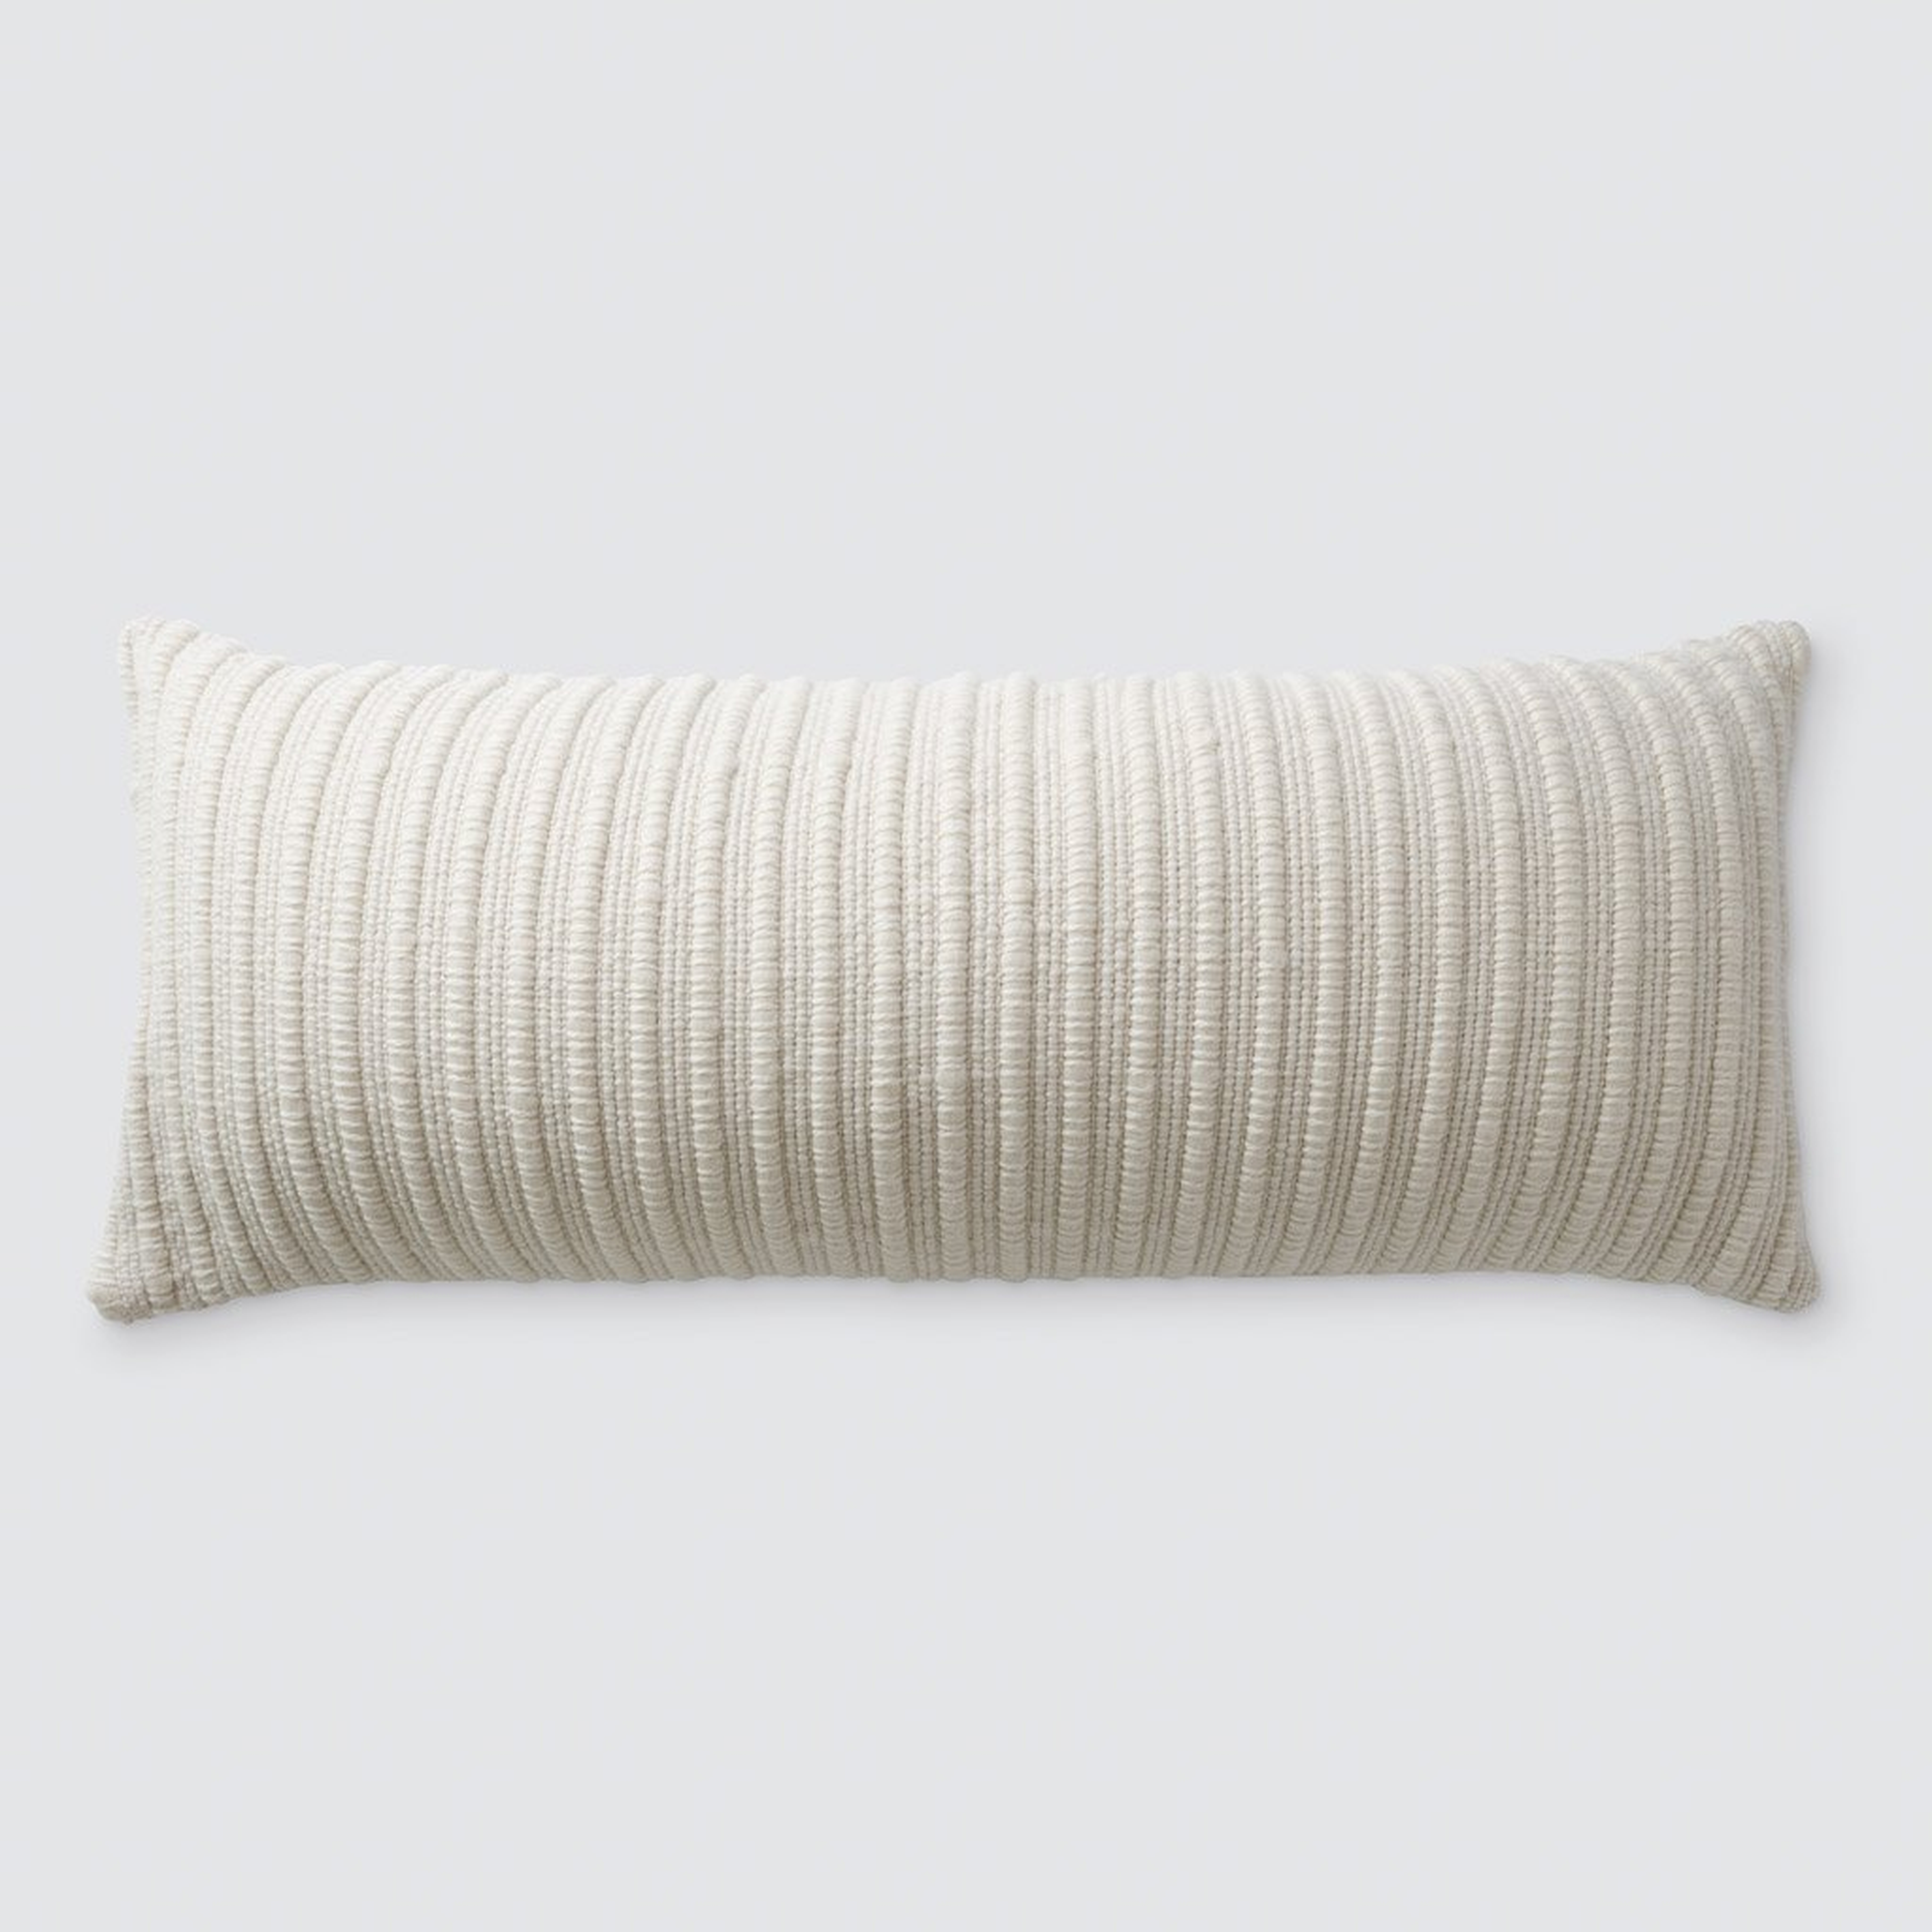 La Duna Lumbar Pillow - 12'' x 30'' By The Citizenry - The Citizenry